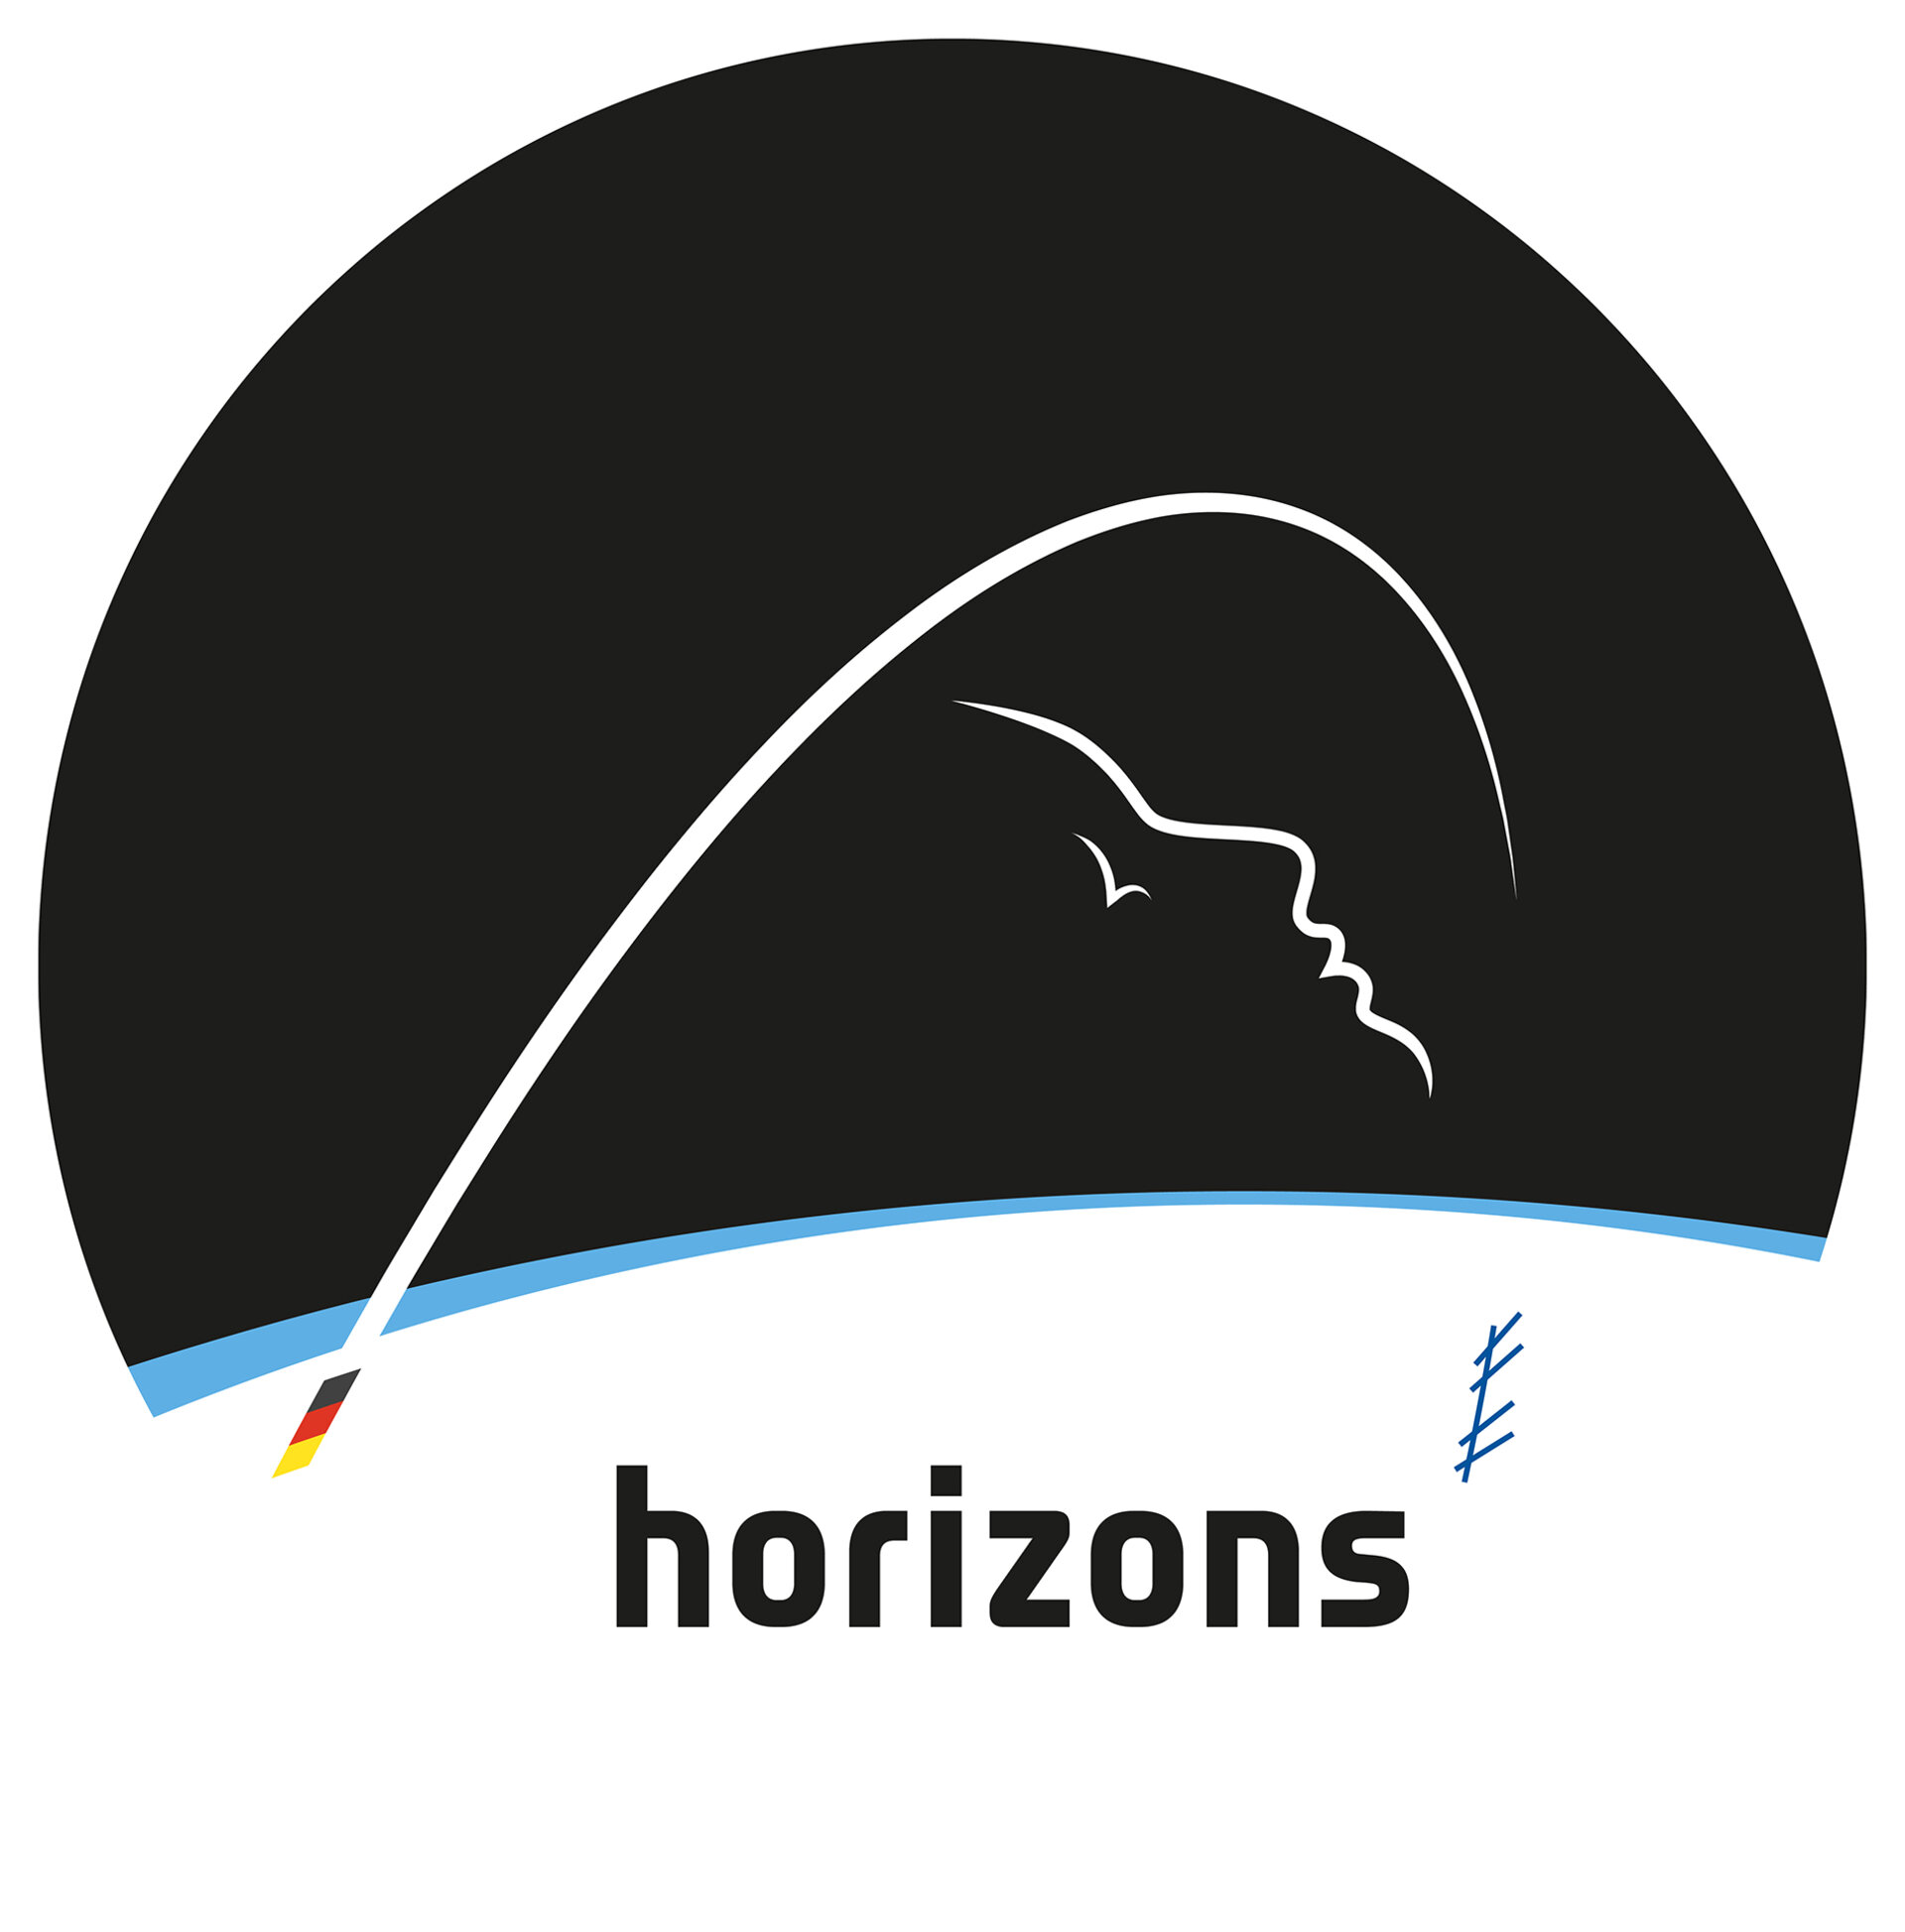 This is the logo for Alexander’s Horizons mission